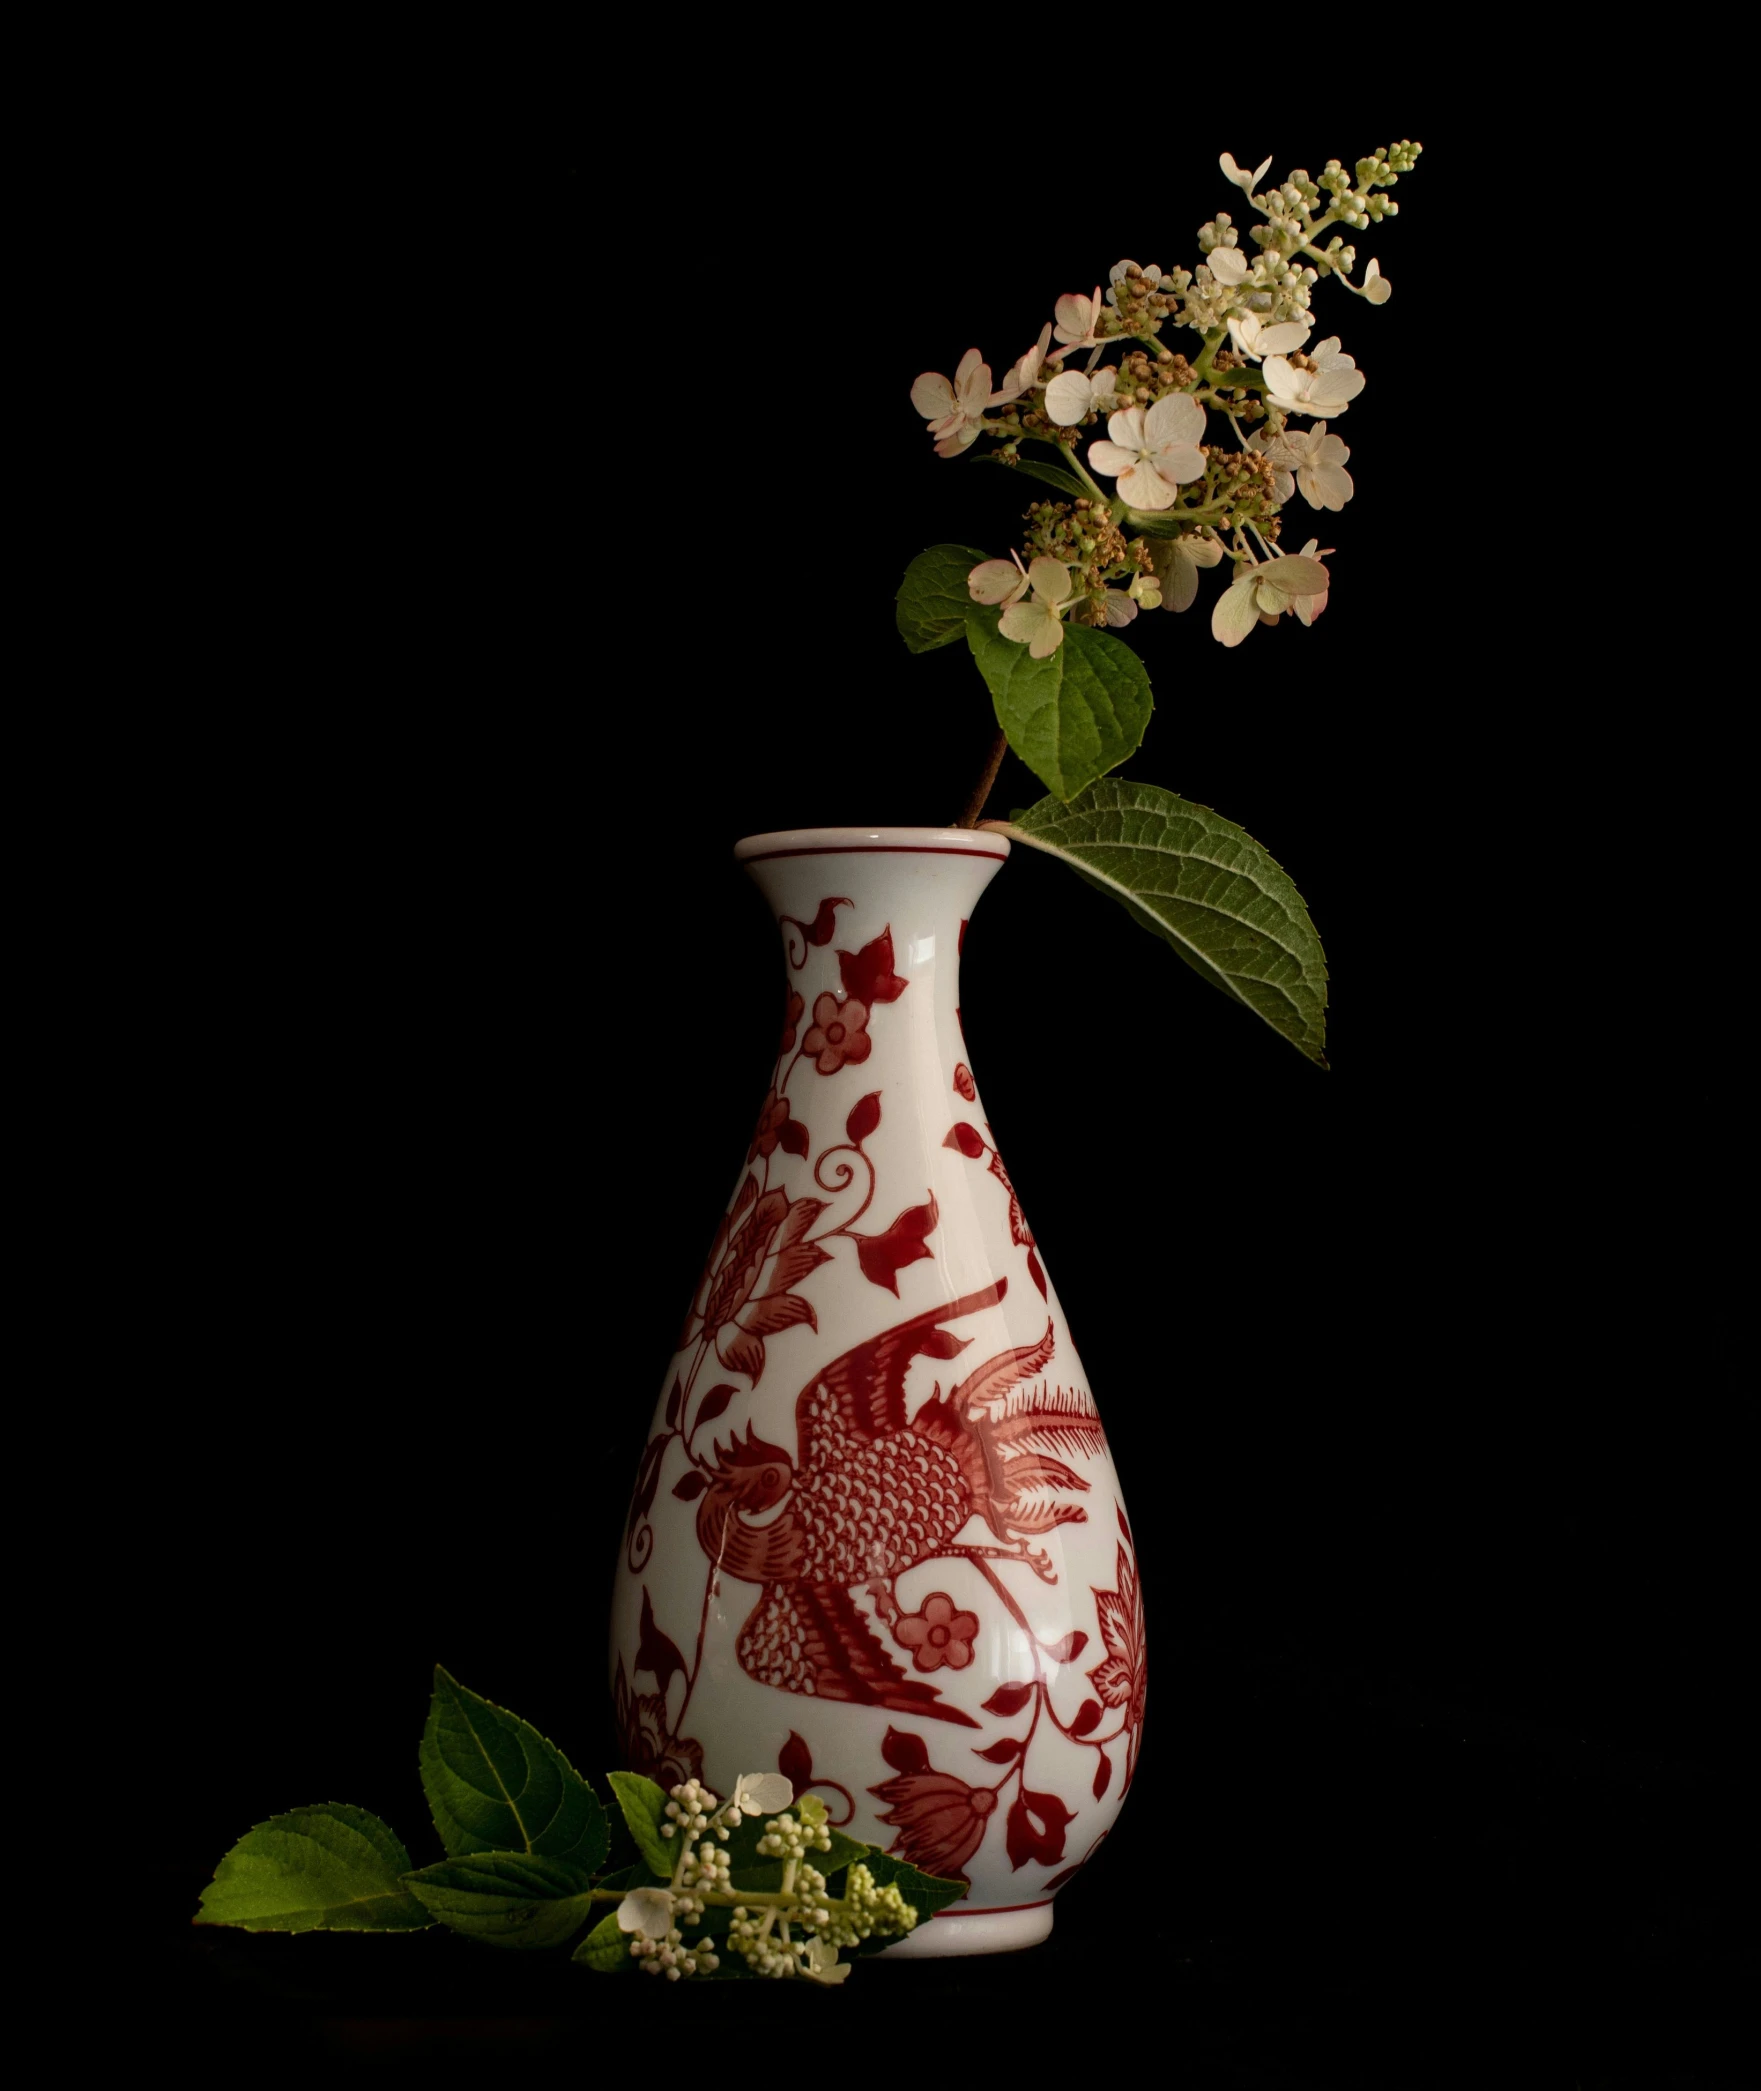 there is a vase that has flowers in it